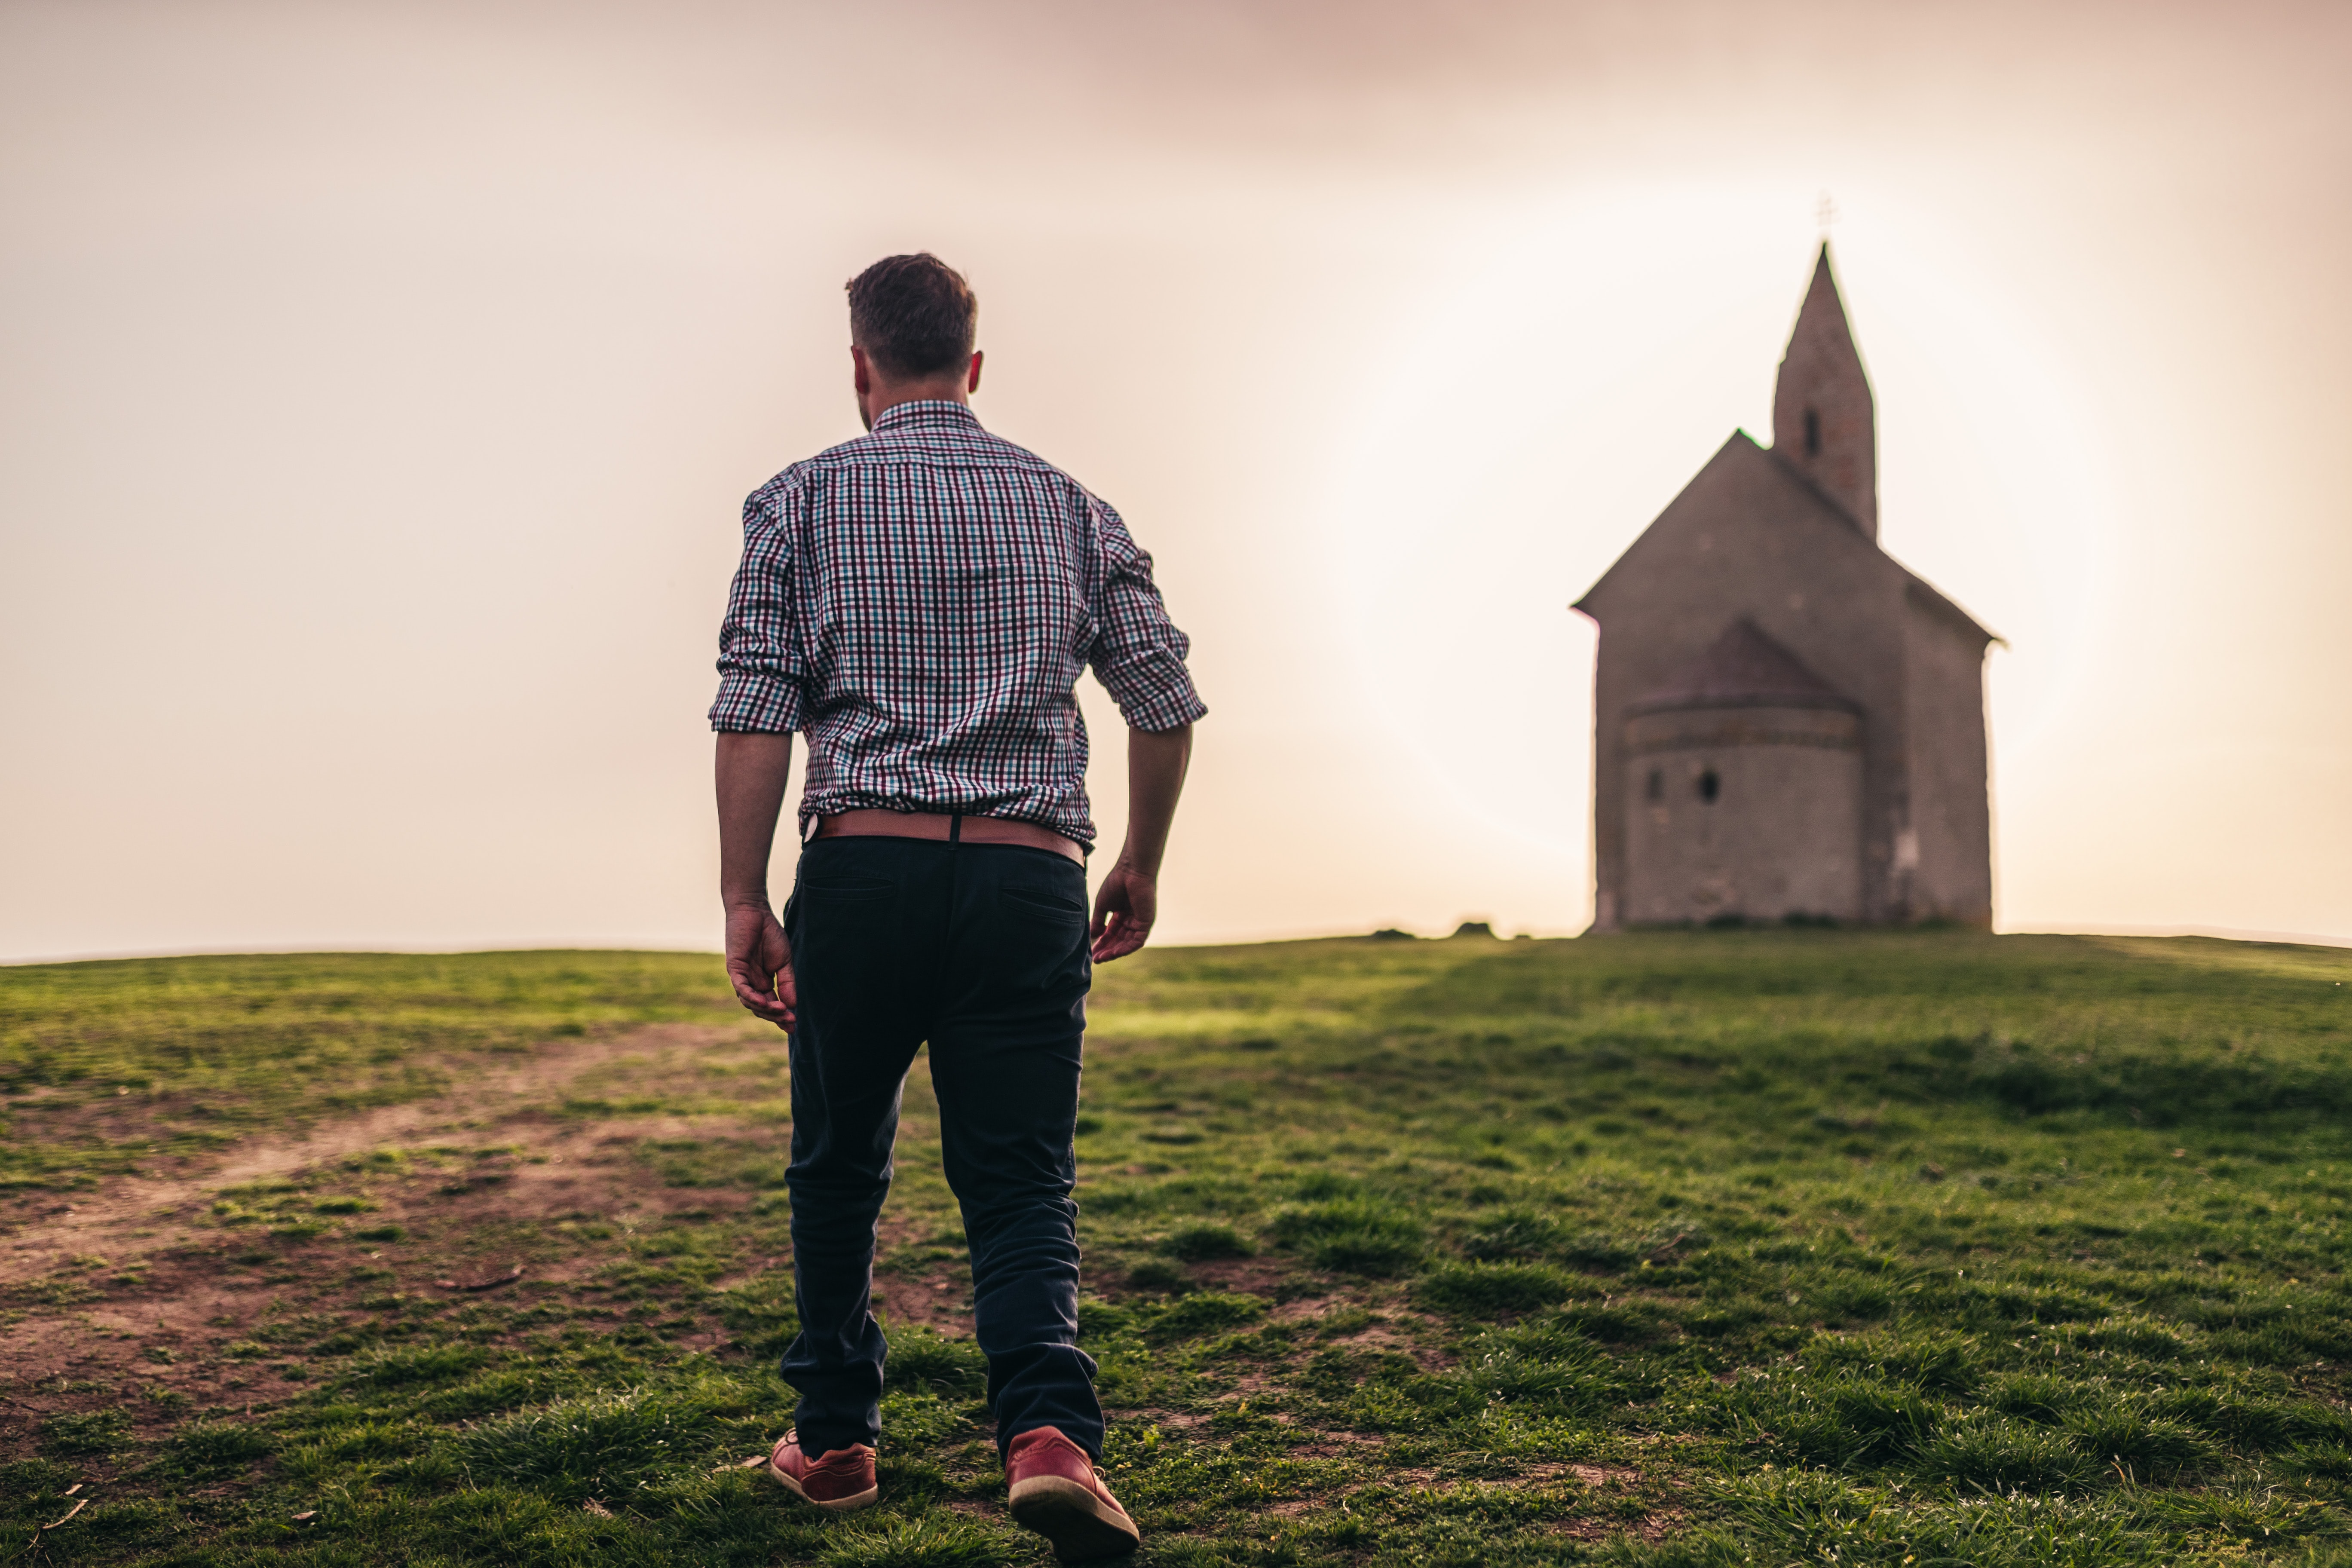 Man walks in field with chapel in the background.